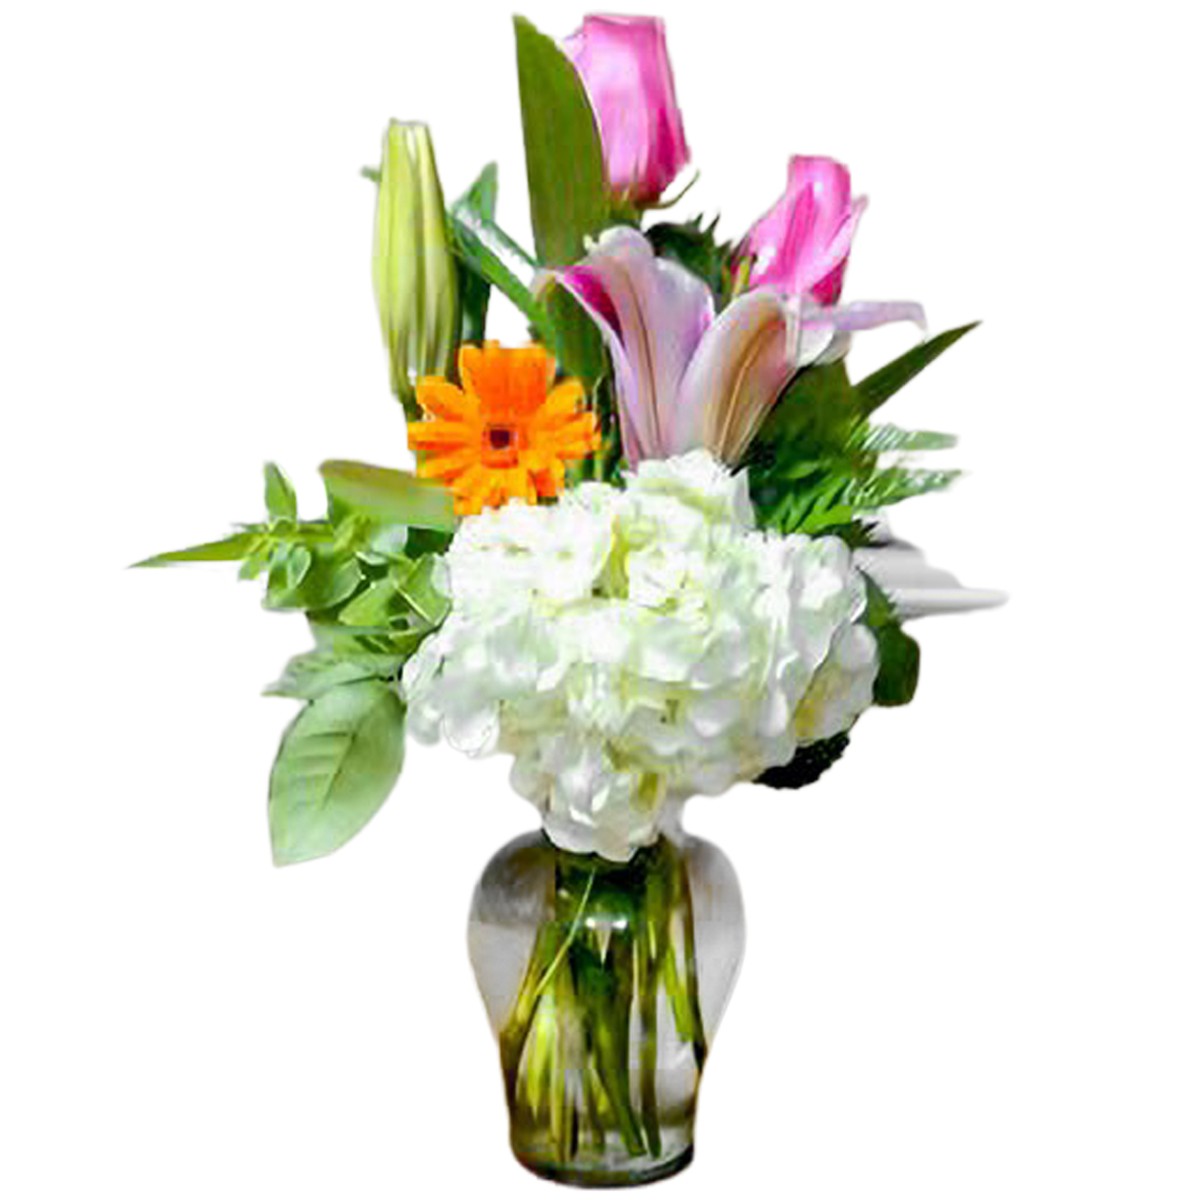 Chattanooga Florist - Flower Delivery by Chantilly Lace Floral